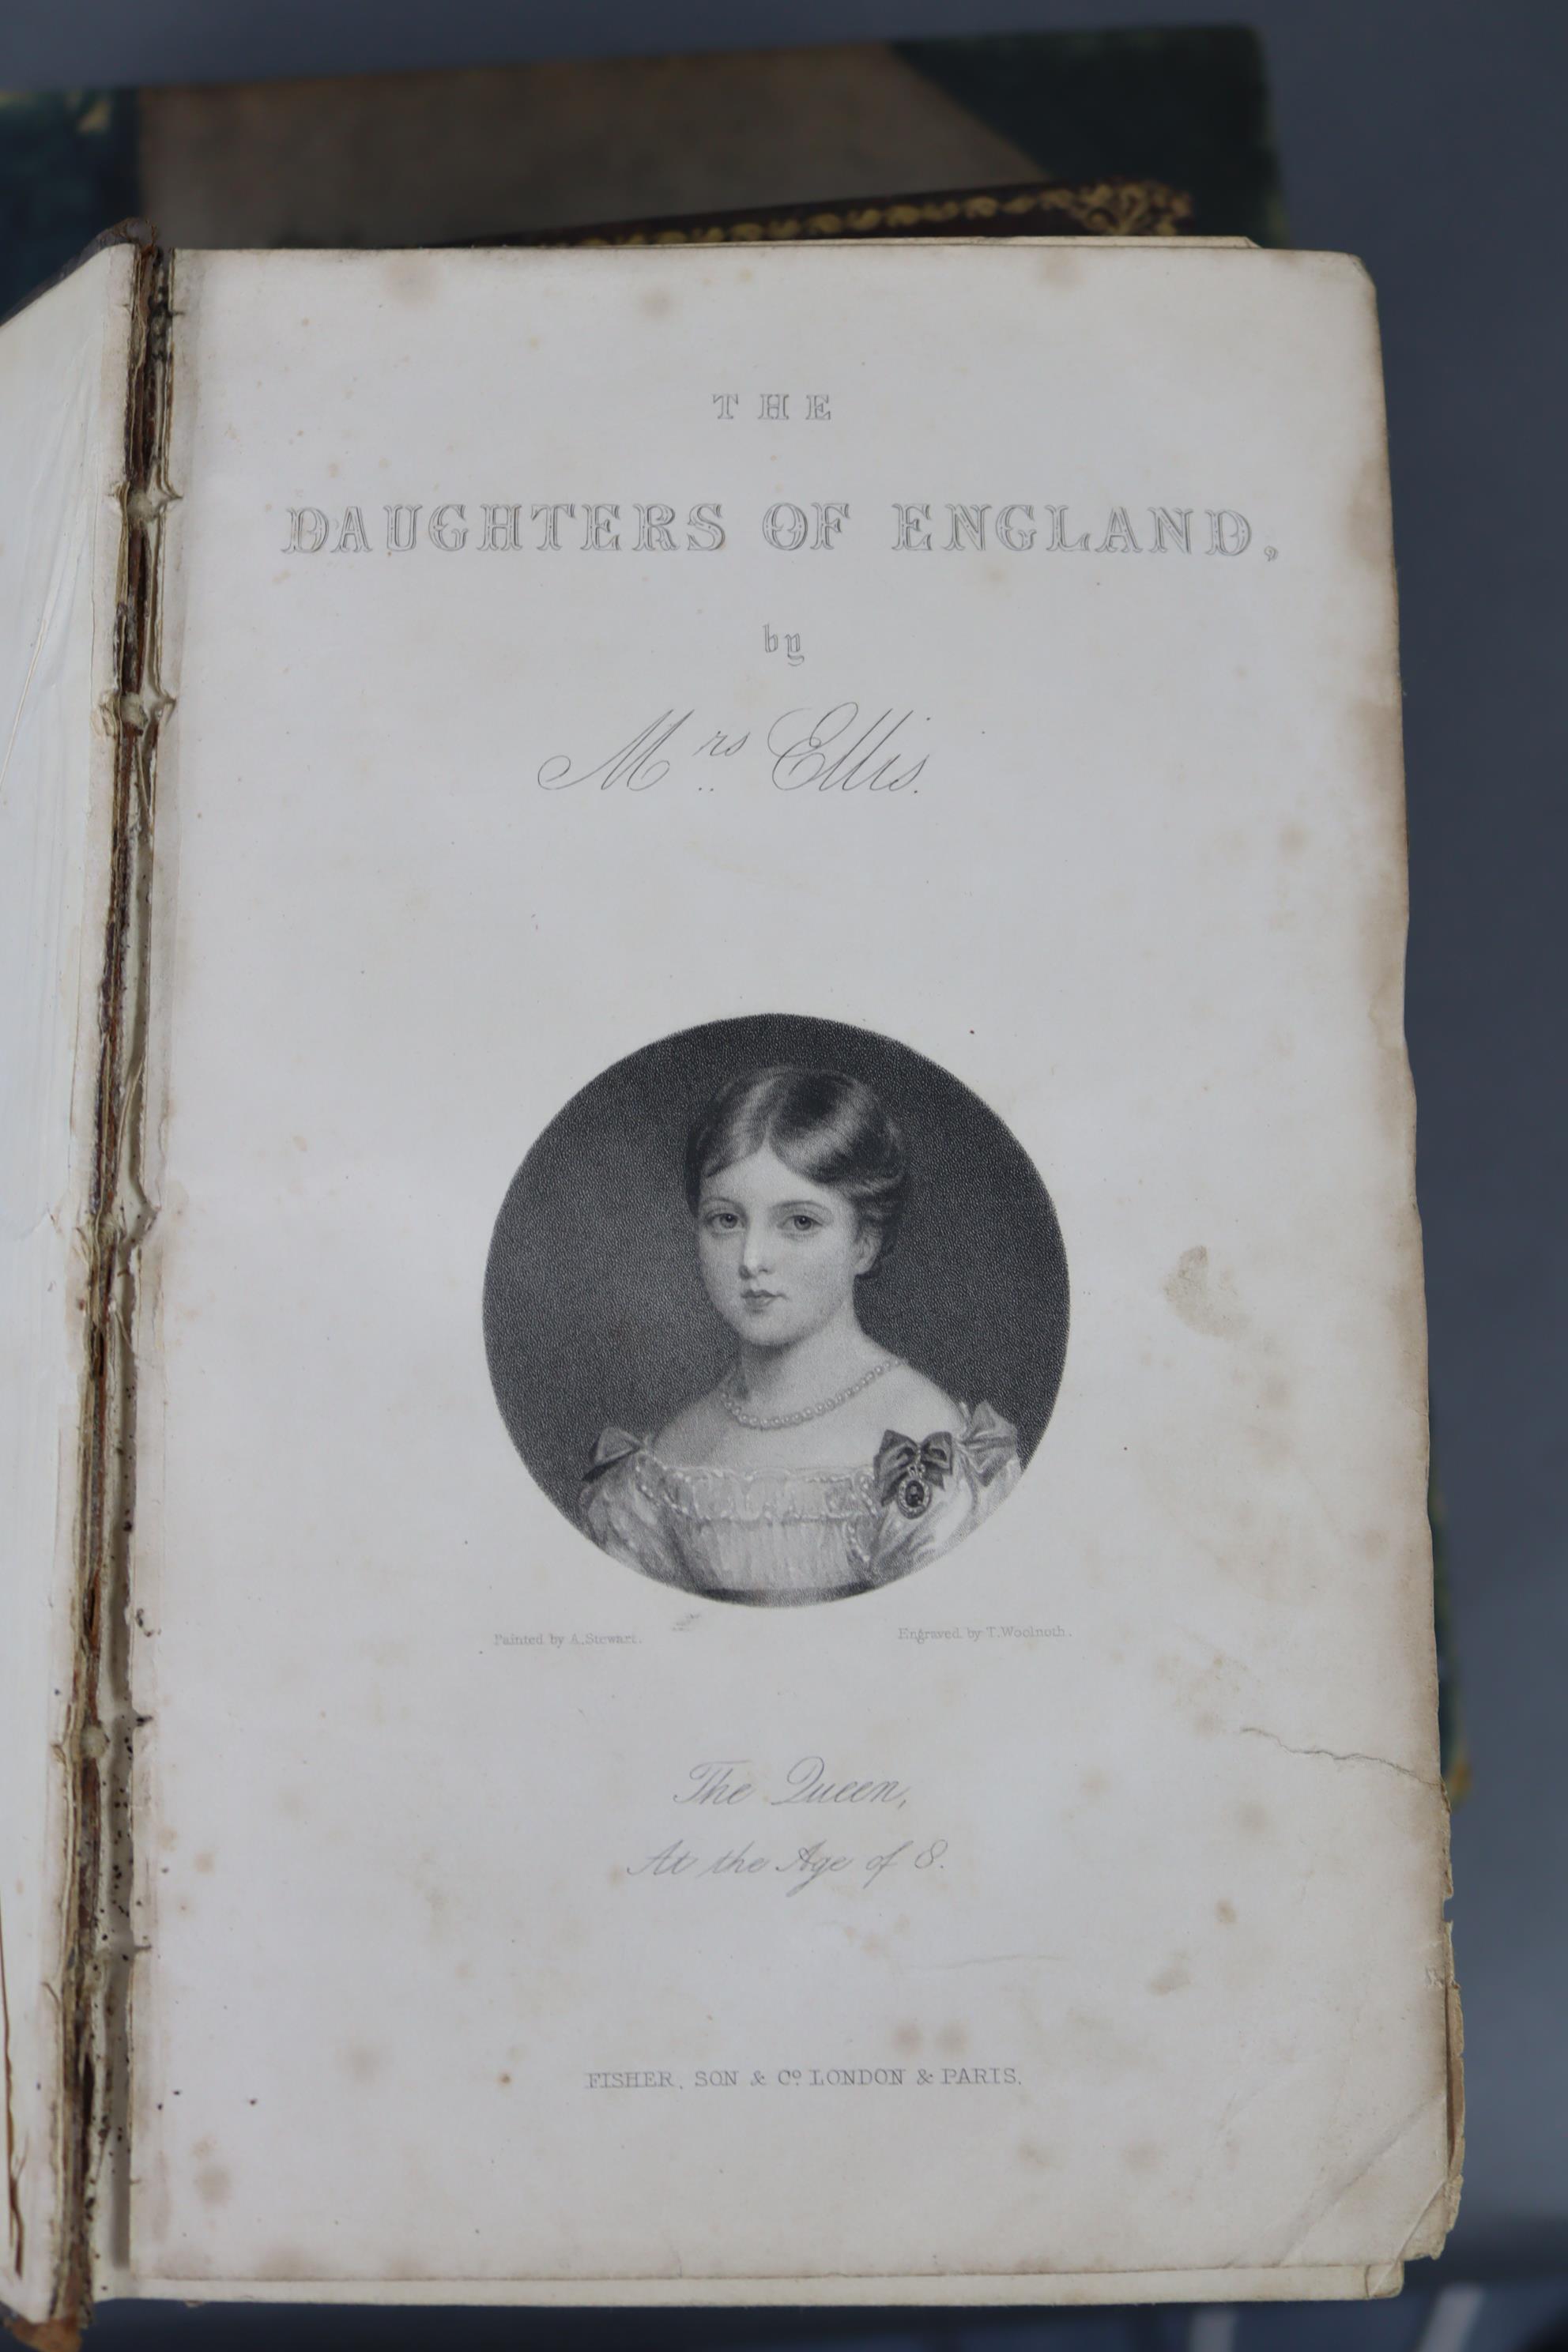 Two 19th century leather-bound volumes by Mrs Ellis “The Daughters of England” & “The Women of - Image 19 of 22